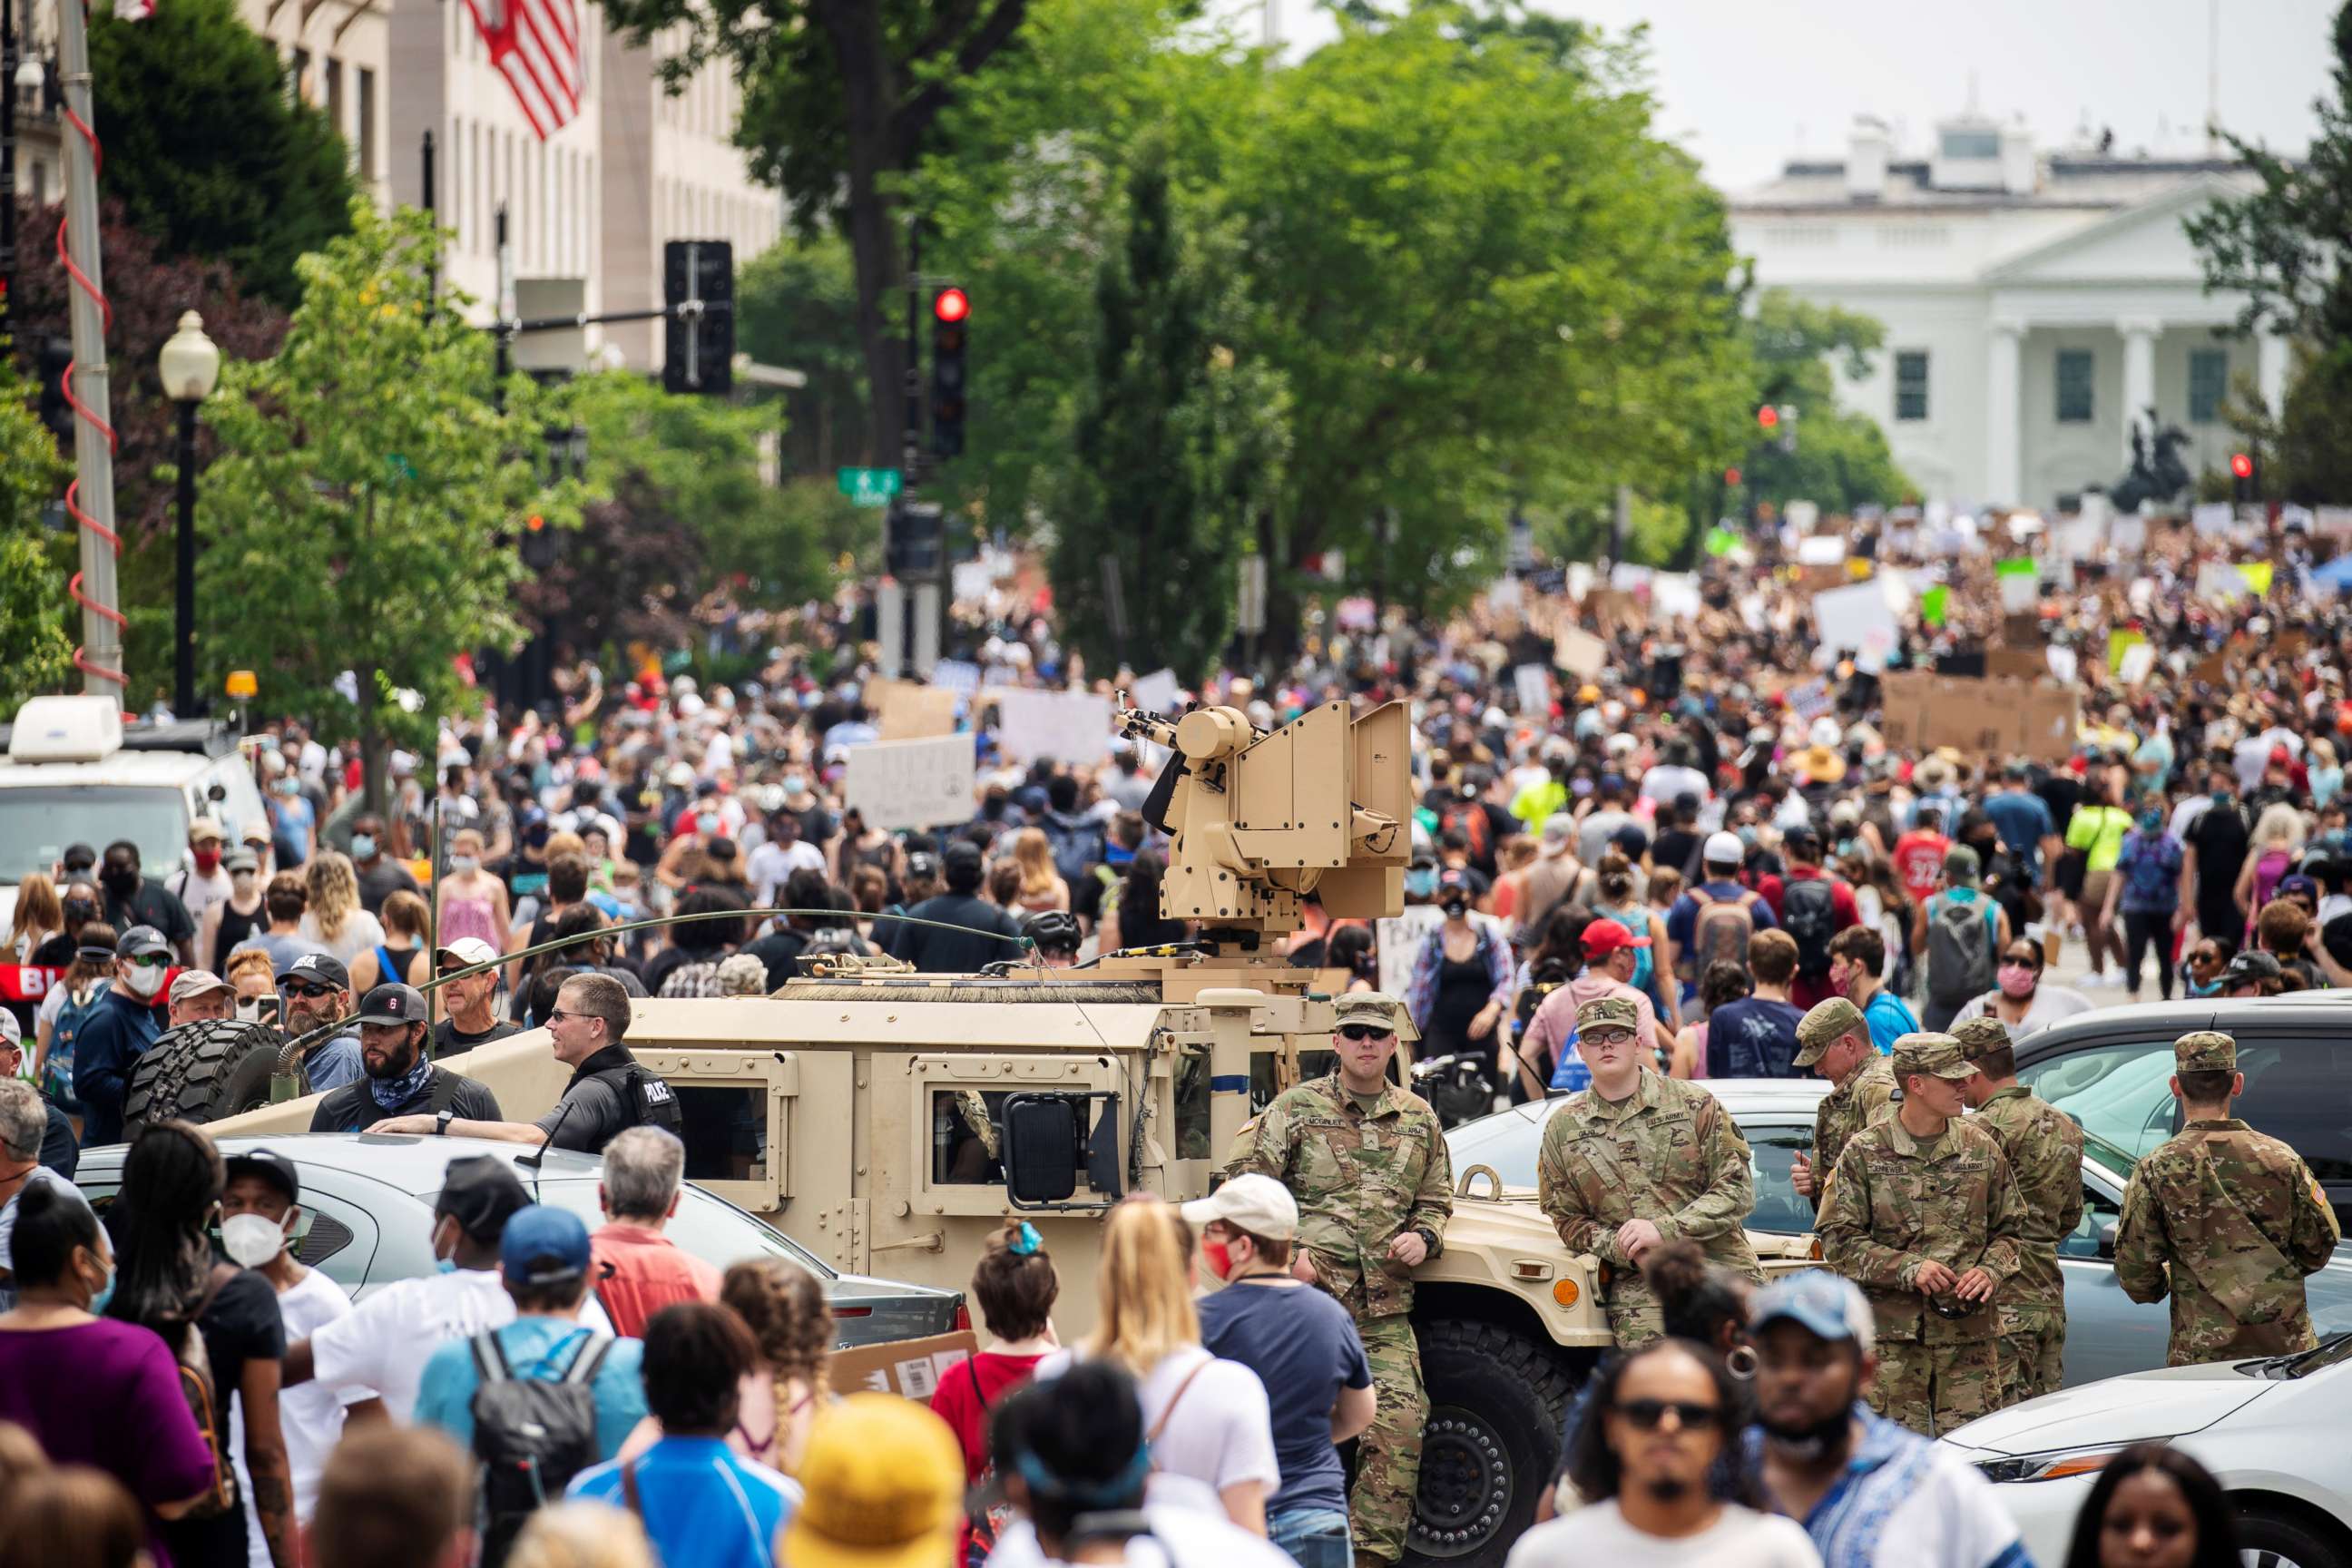 PHOTO: Members of the U.S. National Guard stand next to their vehicle during a protest against racism and police brutality near the White House in Washington, D.C., on June 6, 2020.